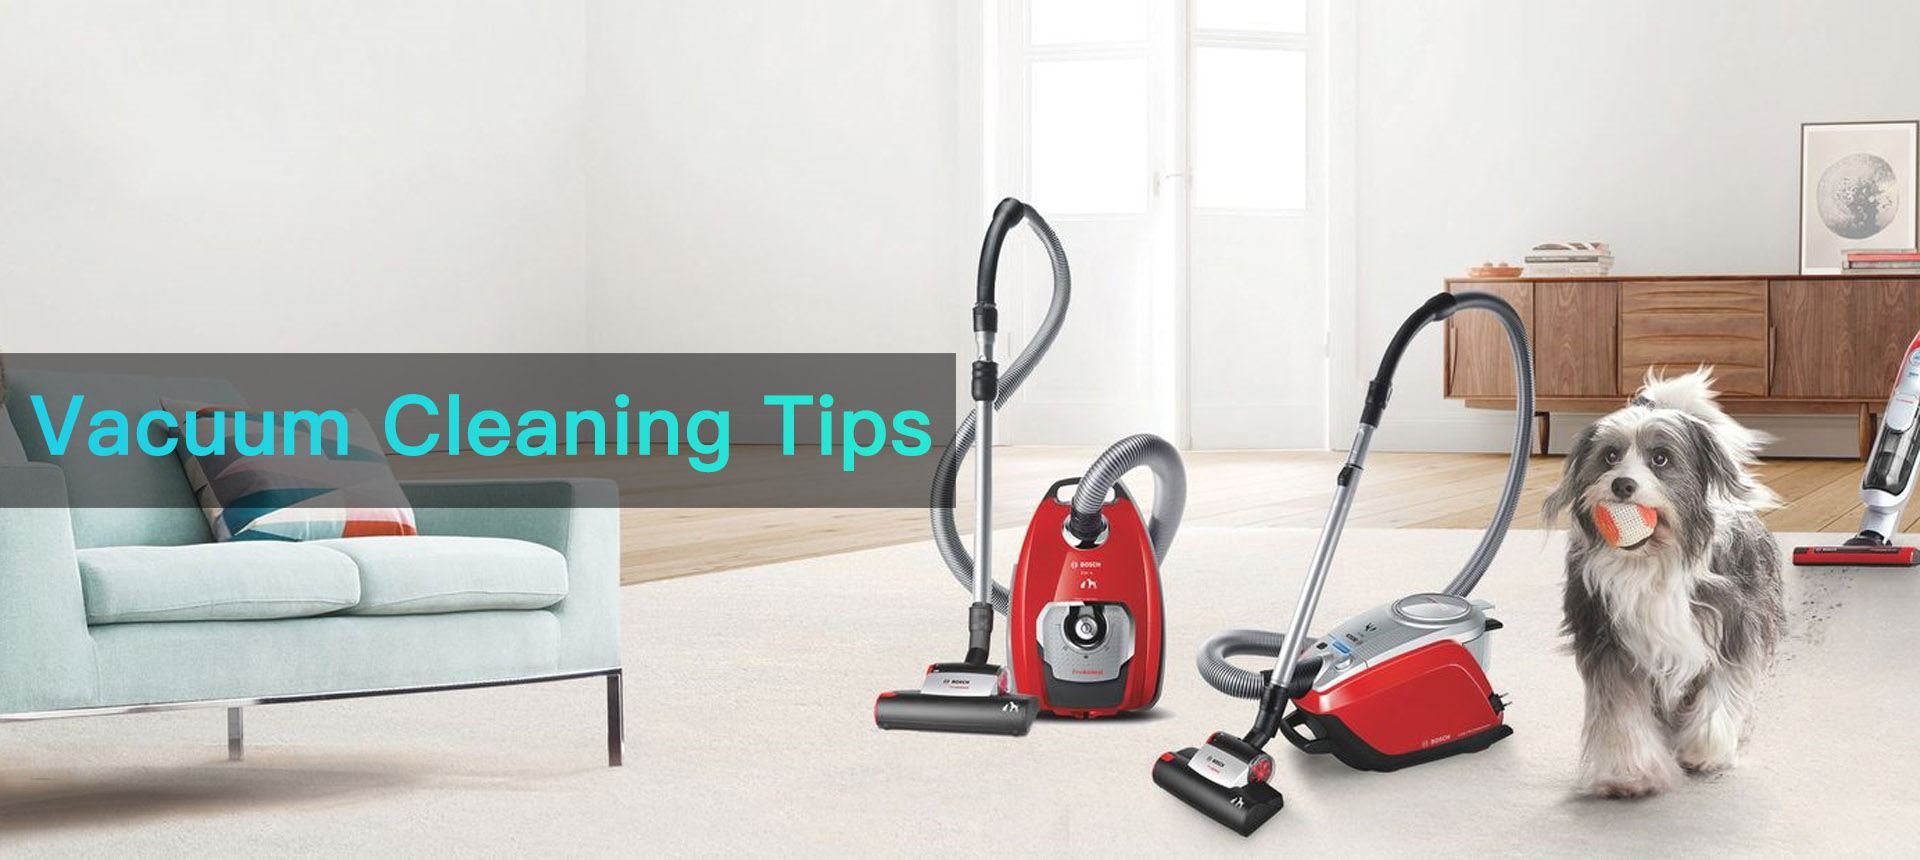 Tips for Cleaning a Vacuum